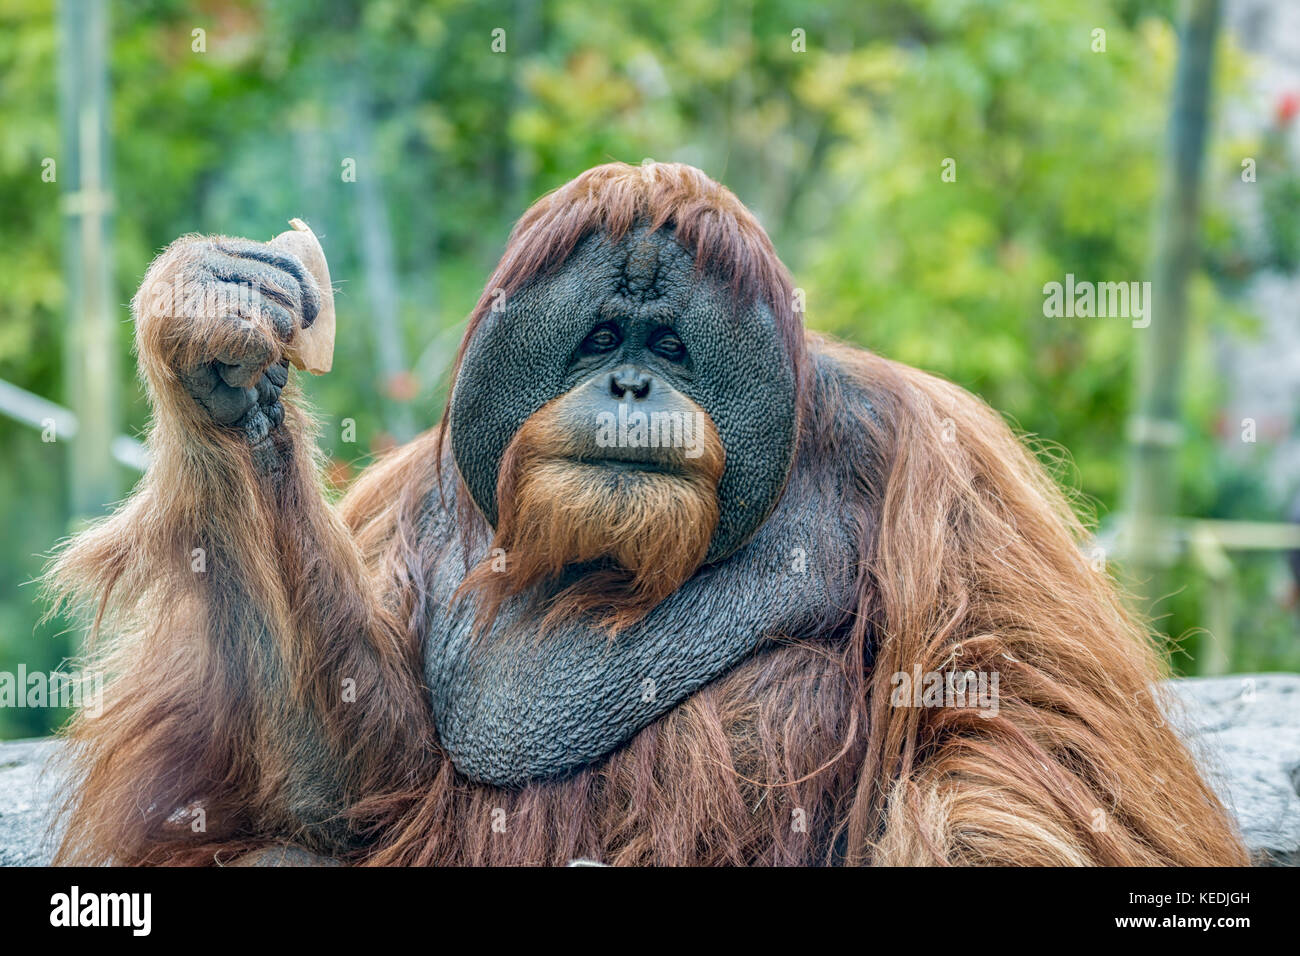 Orangutan (ape) Portrait showing face and upper body  with blurred background Stock Photo